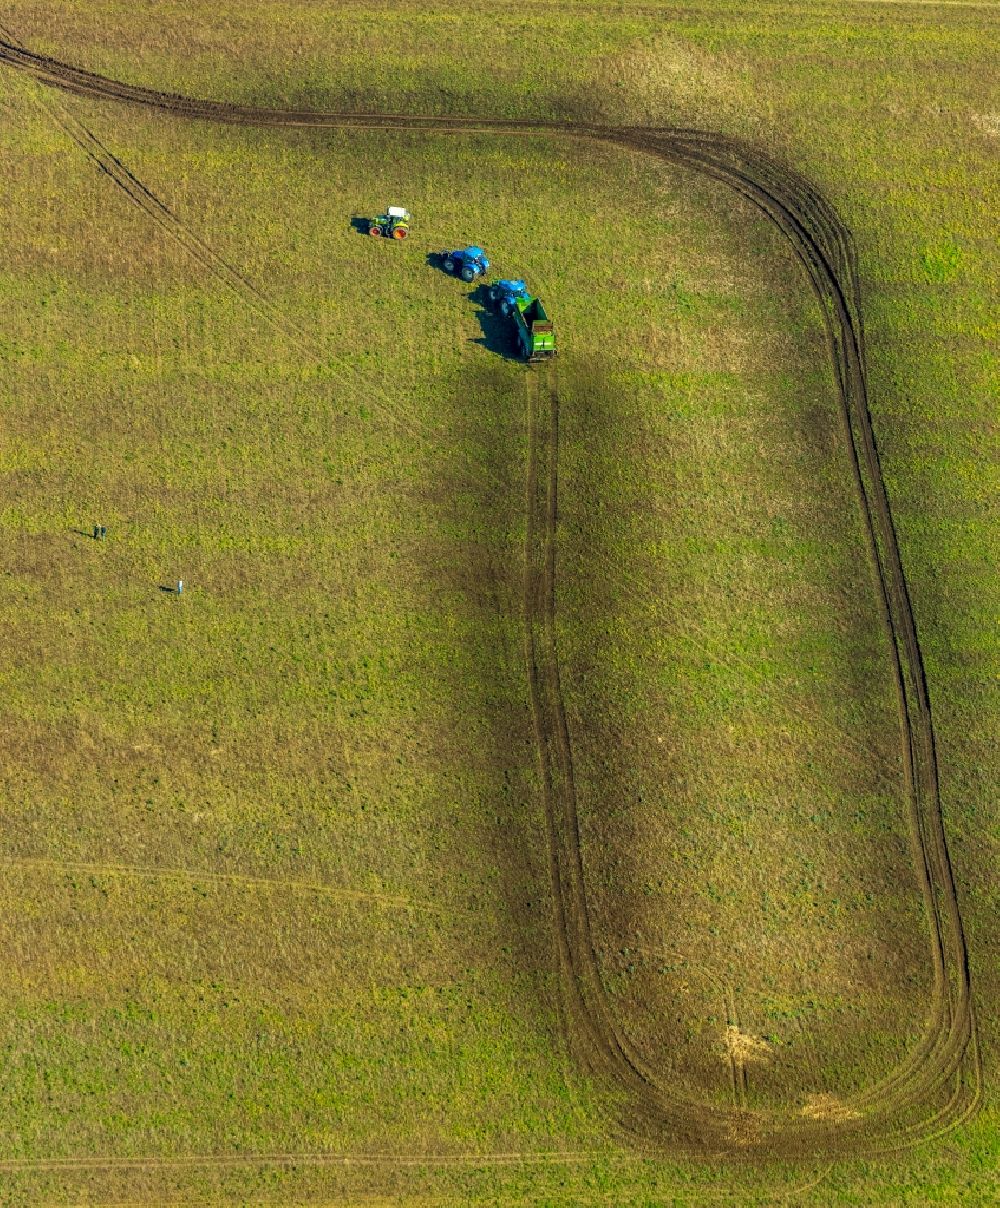 Aerial photograph Dortmund - Spraying manure as fertilizer with tractor and tank trailer on agricultural fields in the district Berghofen Dorf in Dortmund in the state North Rhine-Westphalia, Germany